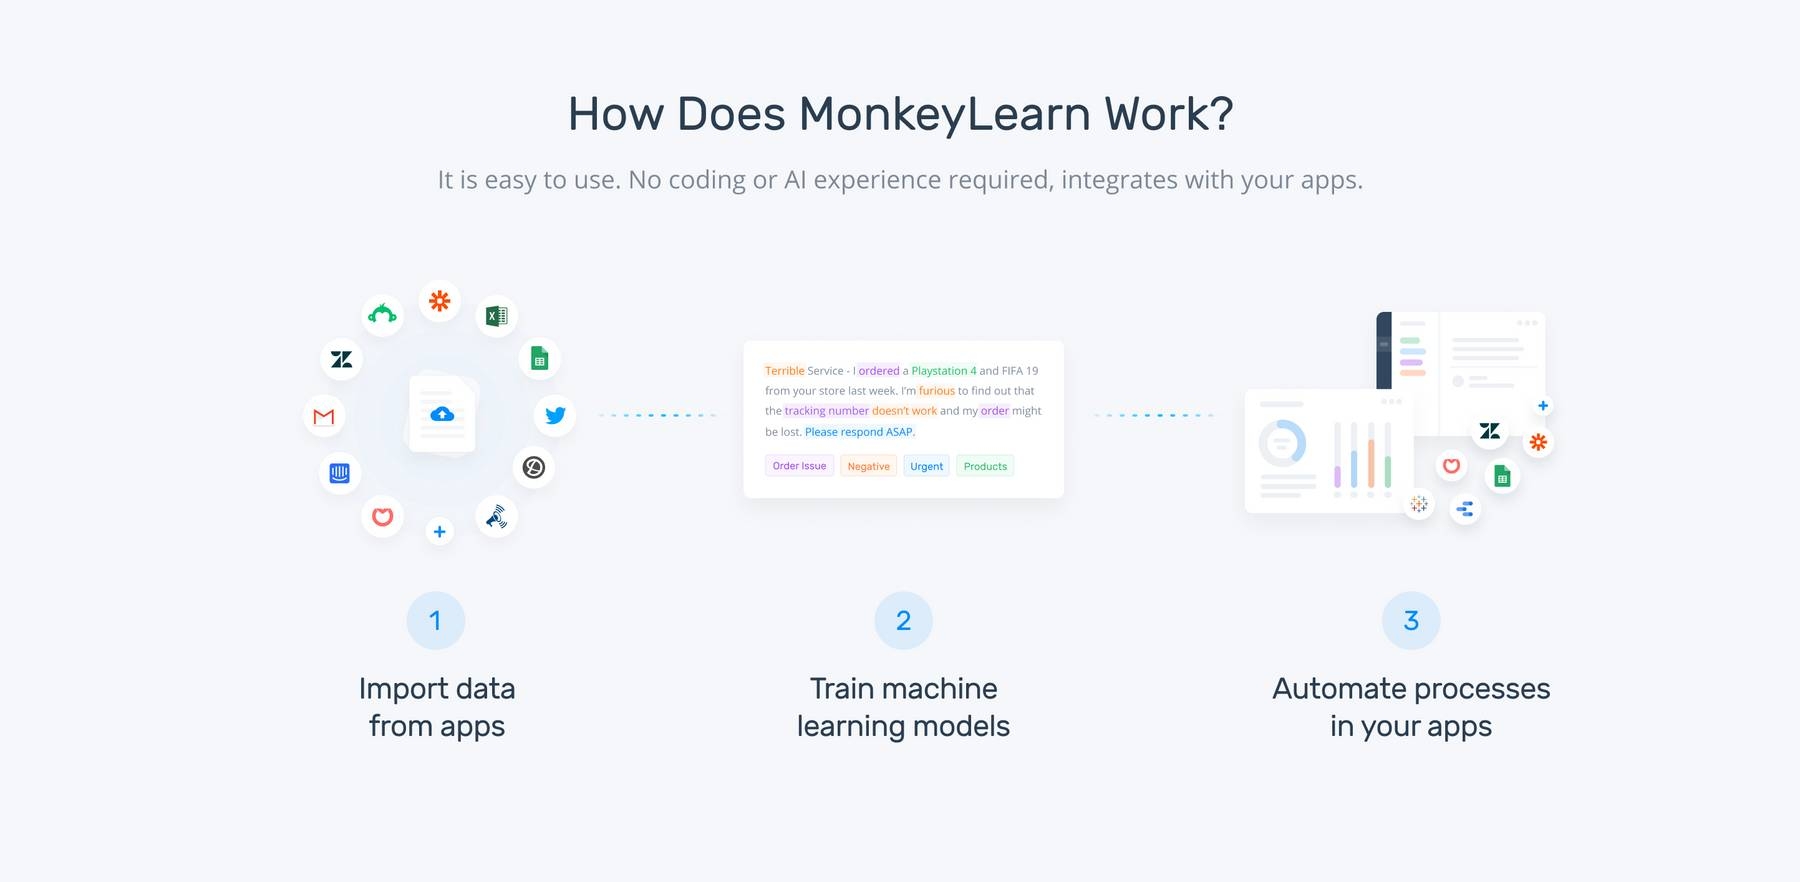 An explanation of how MonkeyLearn works: import data from apps, train machine learning models to analyze voice of customer data, automate processes